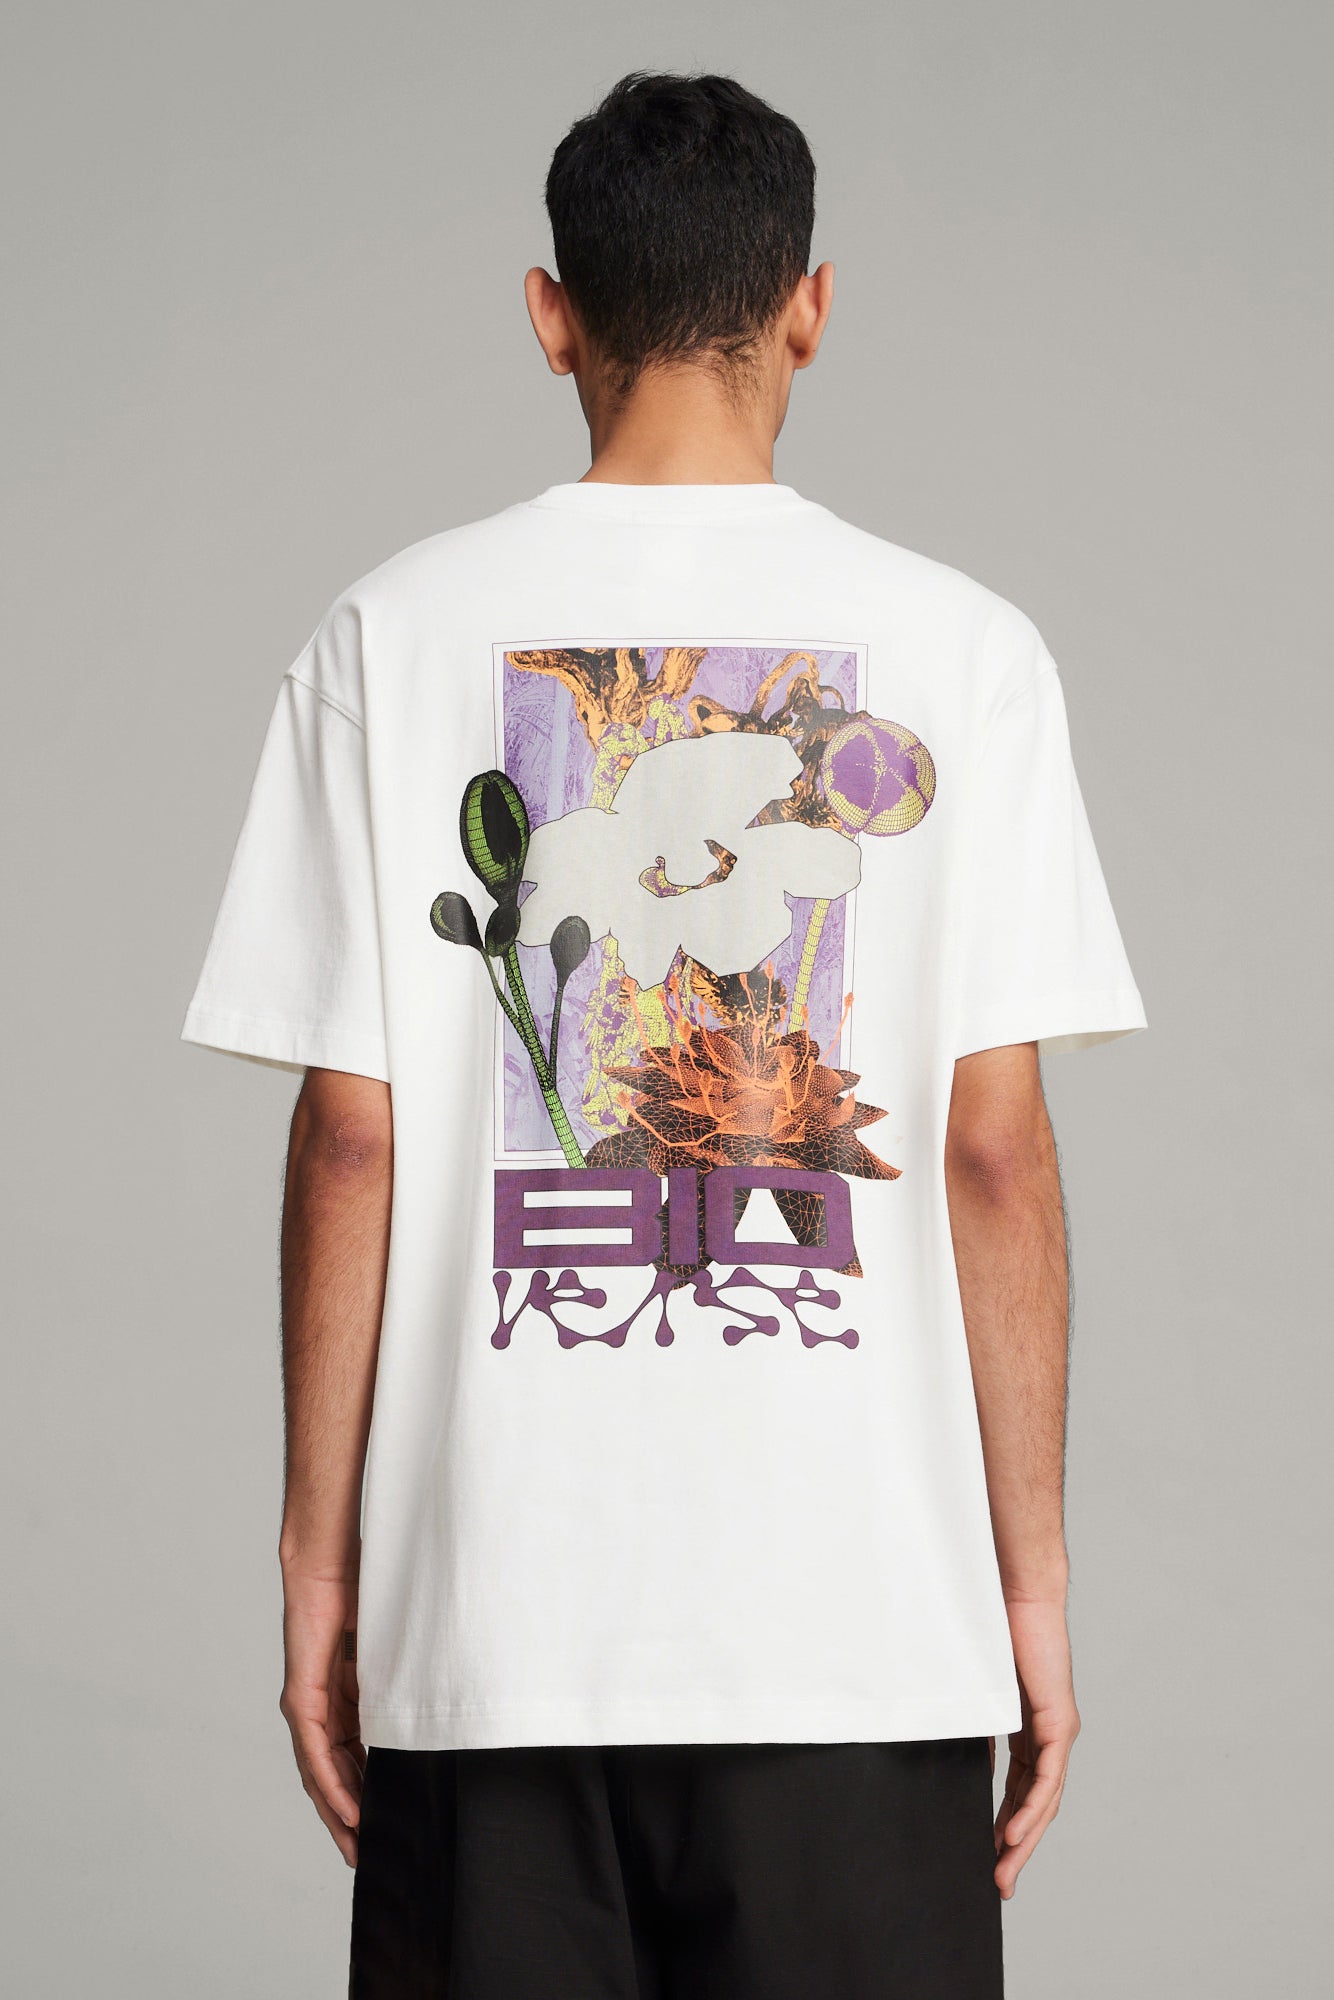 The PUMA X P.A.M. SS24 GRAPHIC TEE PUMA WHITE available online with global shipping, and in PAM Stores Melbourne and Sydney.